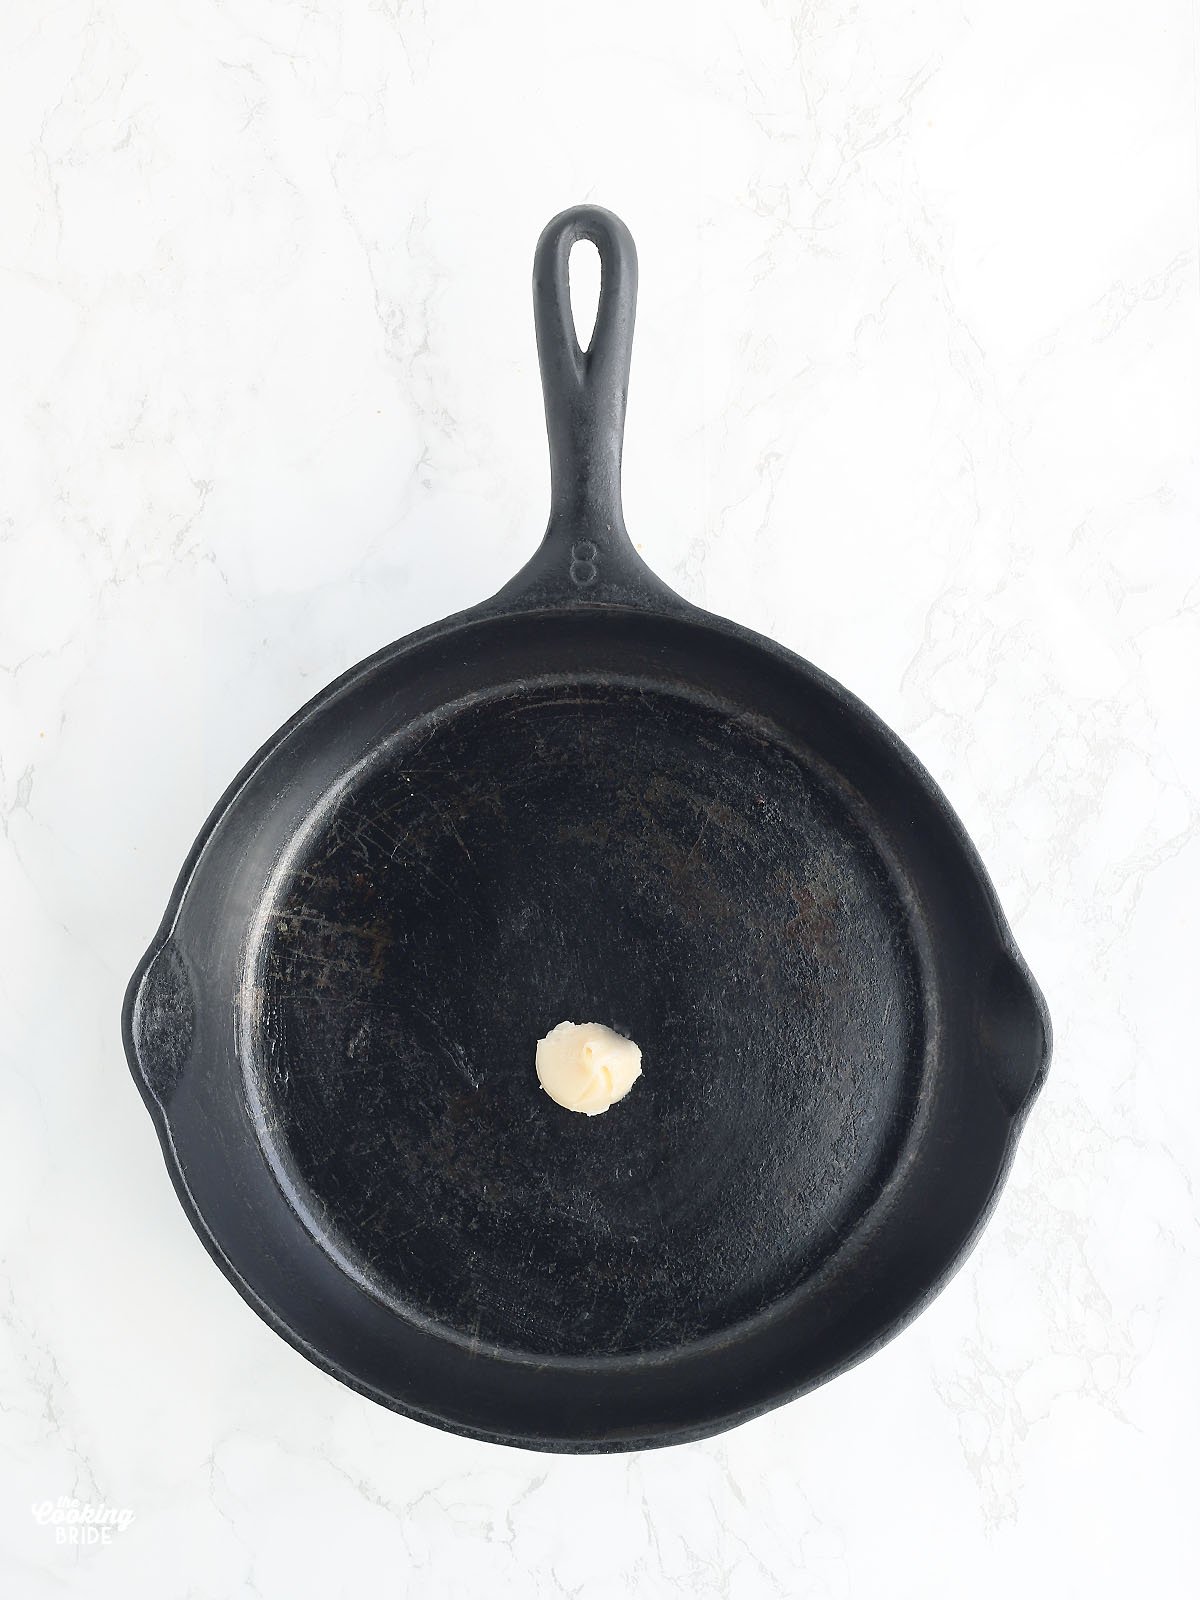 one tablespoon of bacon grease in a cast iron skillet